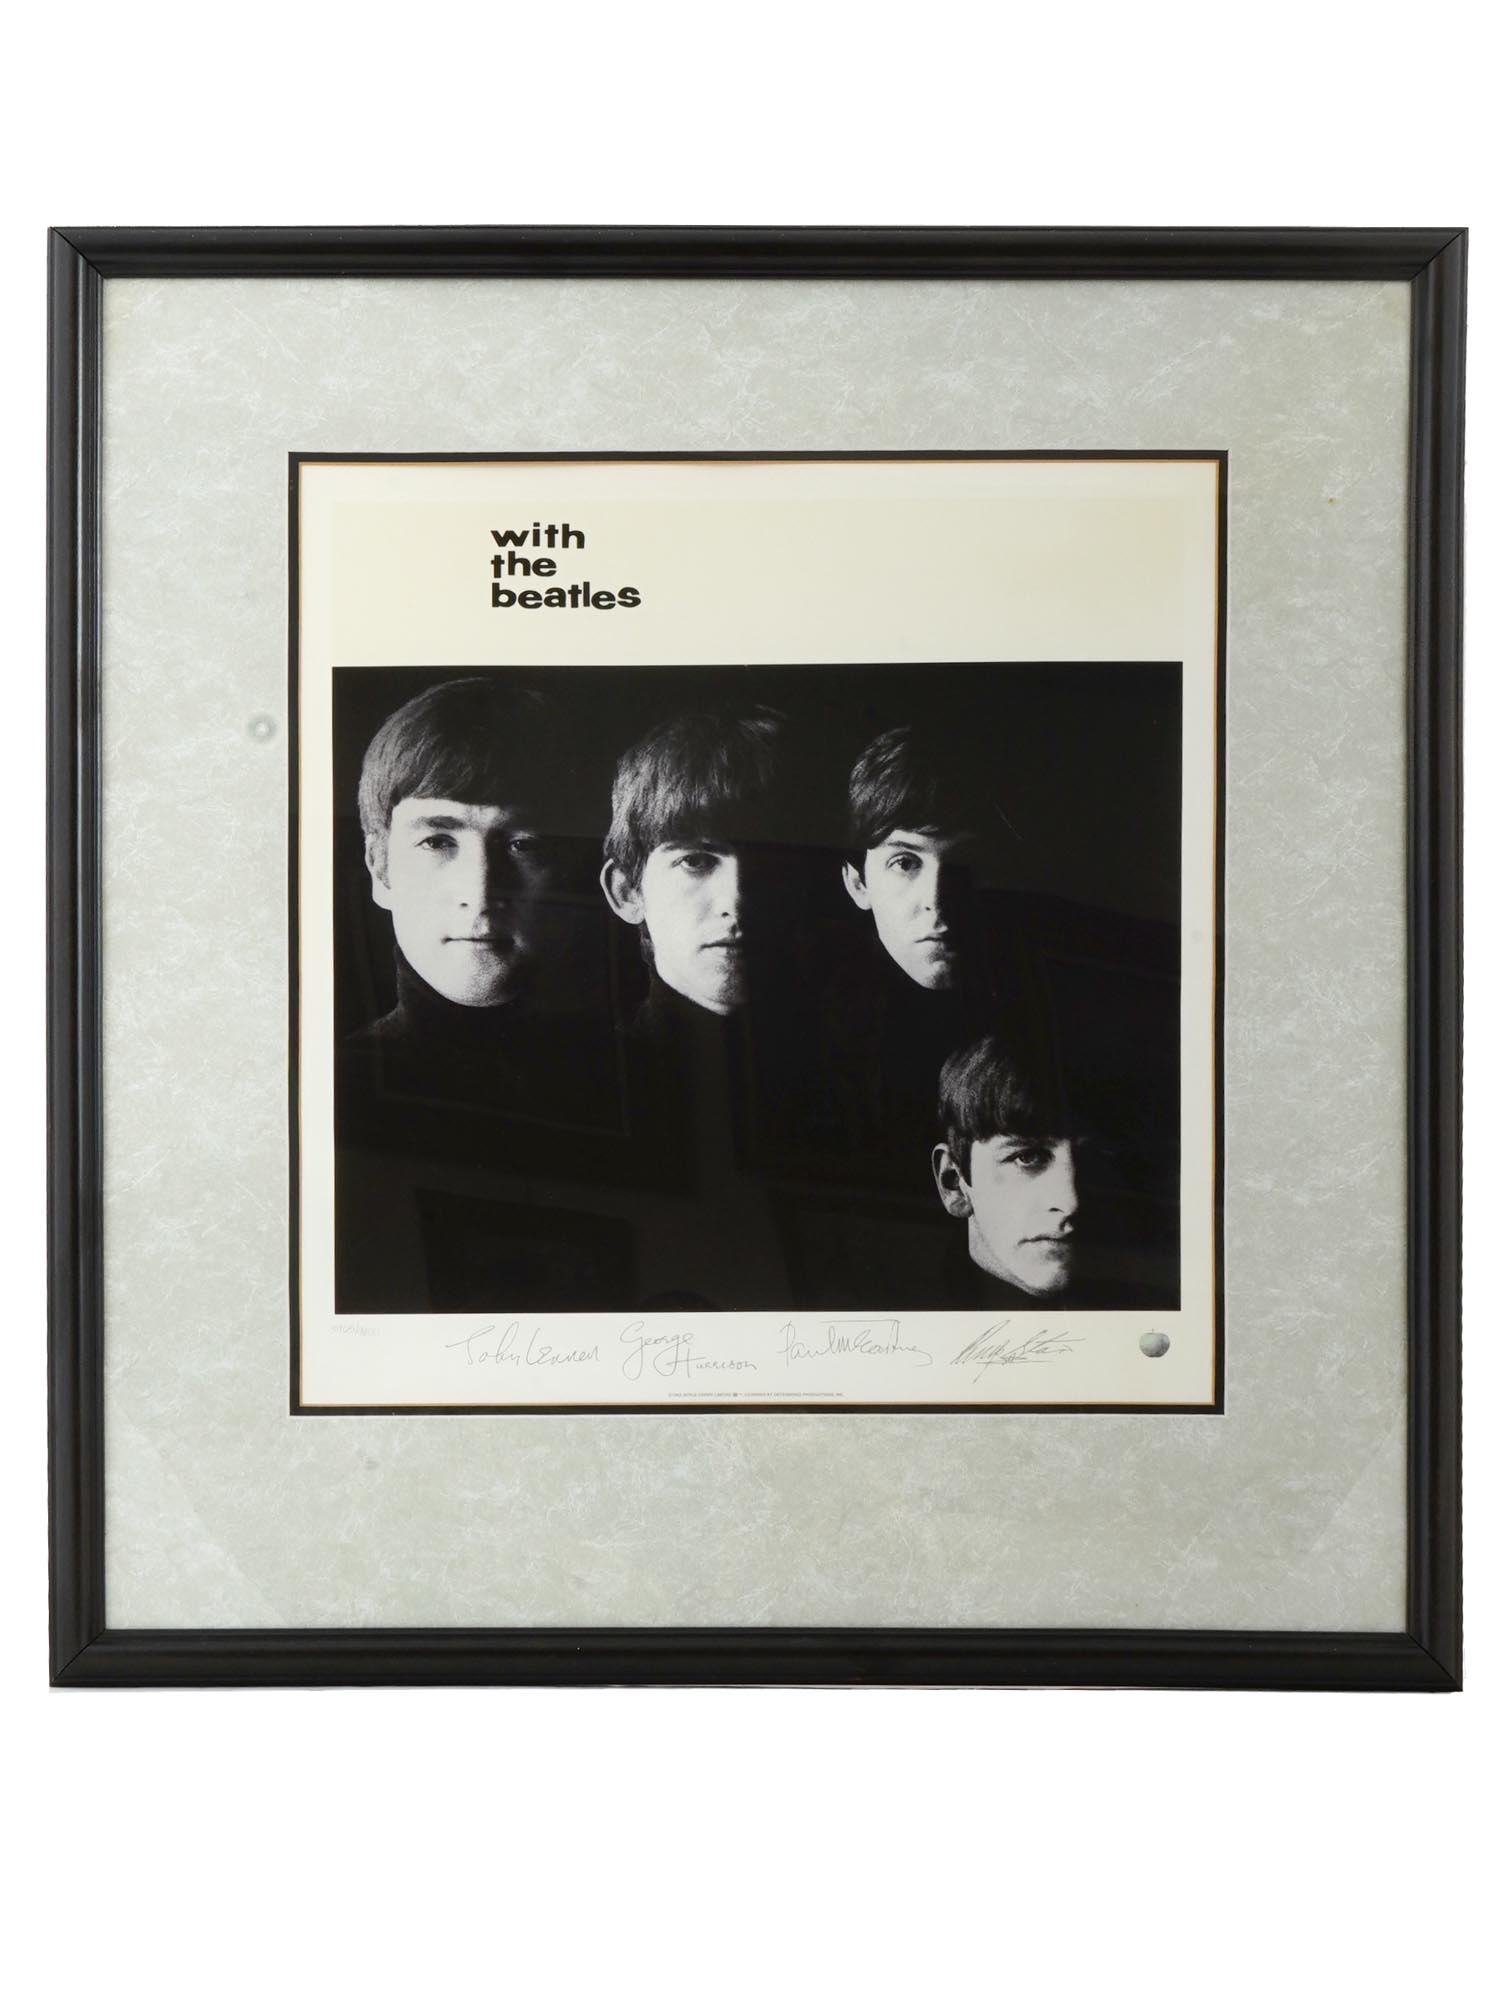 SIGNED LIMITED EDITION LITHOGRAPHIC PRINT BEATLES 1993 PIC-0